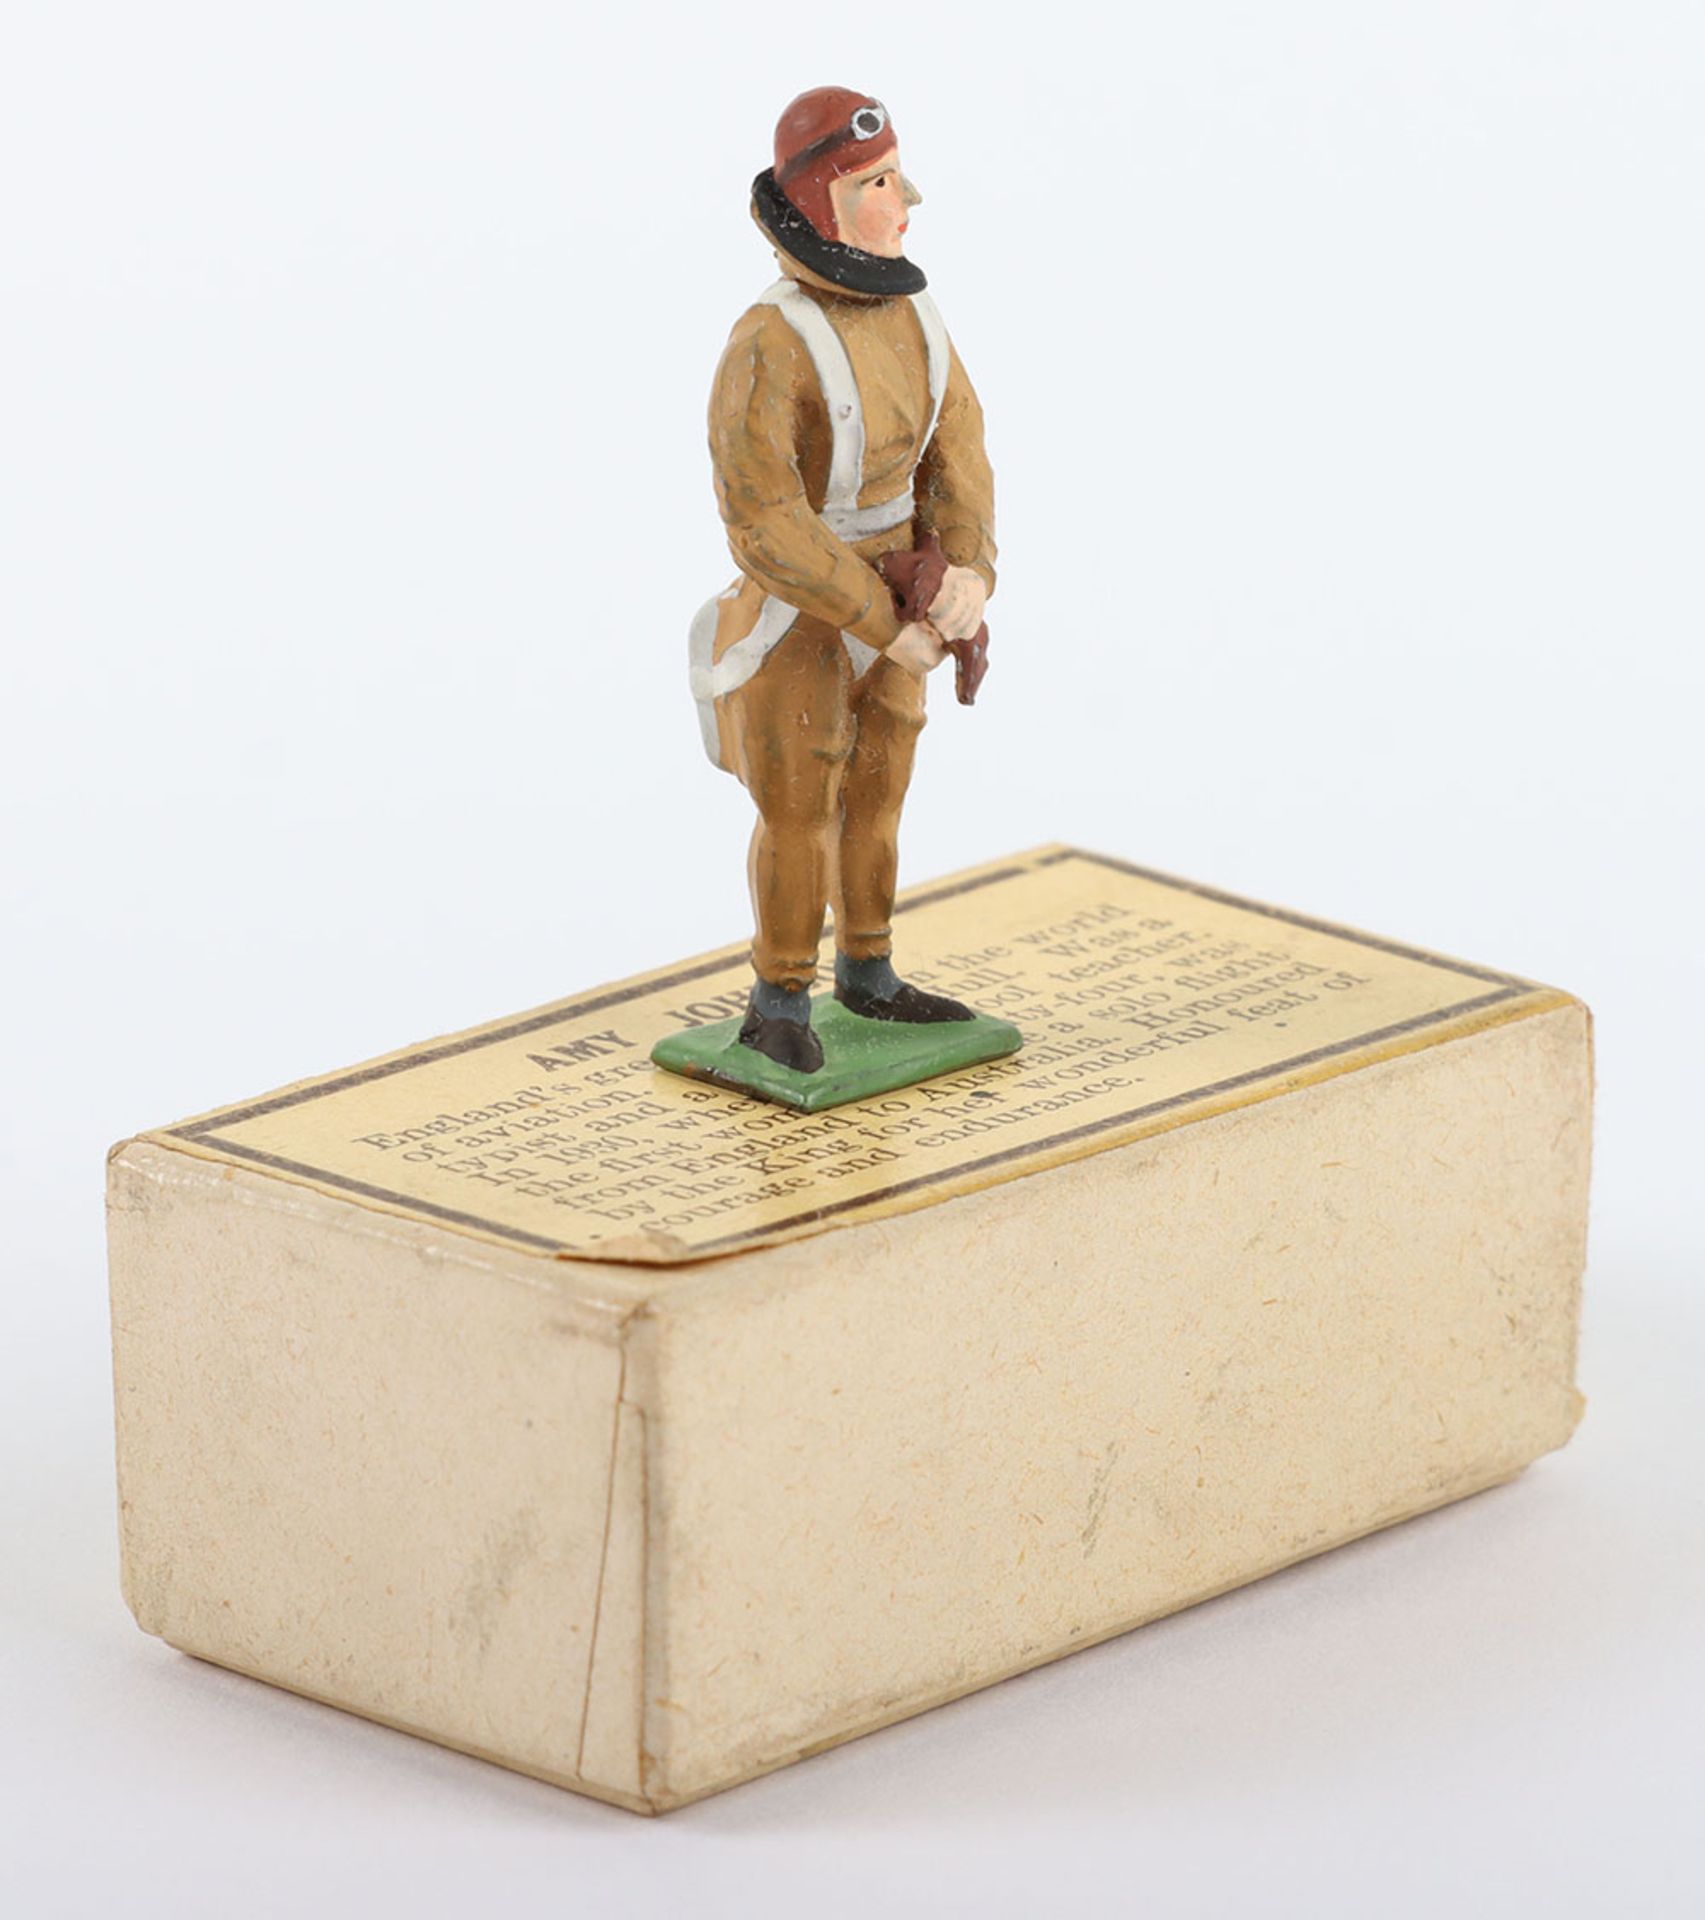 Rare boxed Heyde for Bassett-Lowke Personalty figure Amy Johnson, circa 1925 - Image 4 of 4